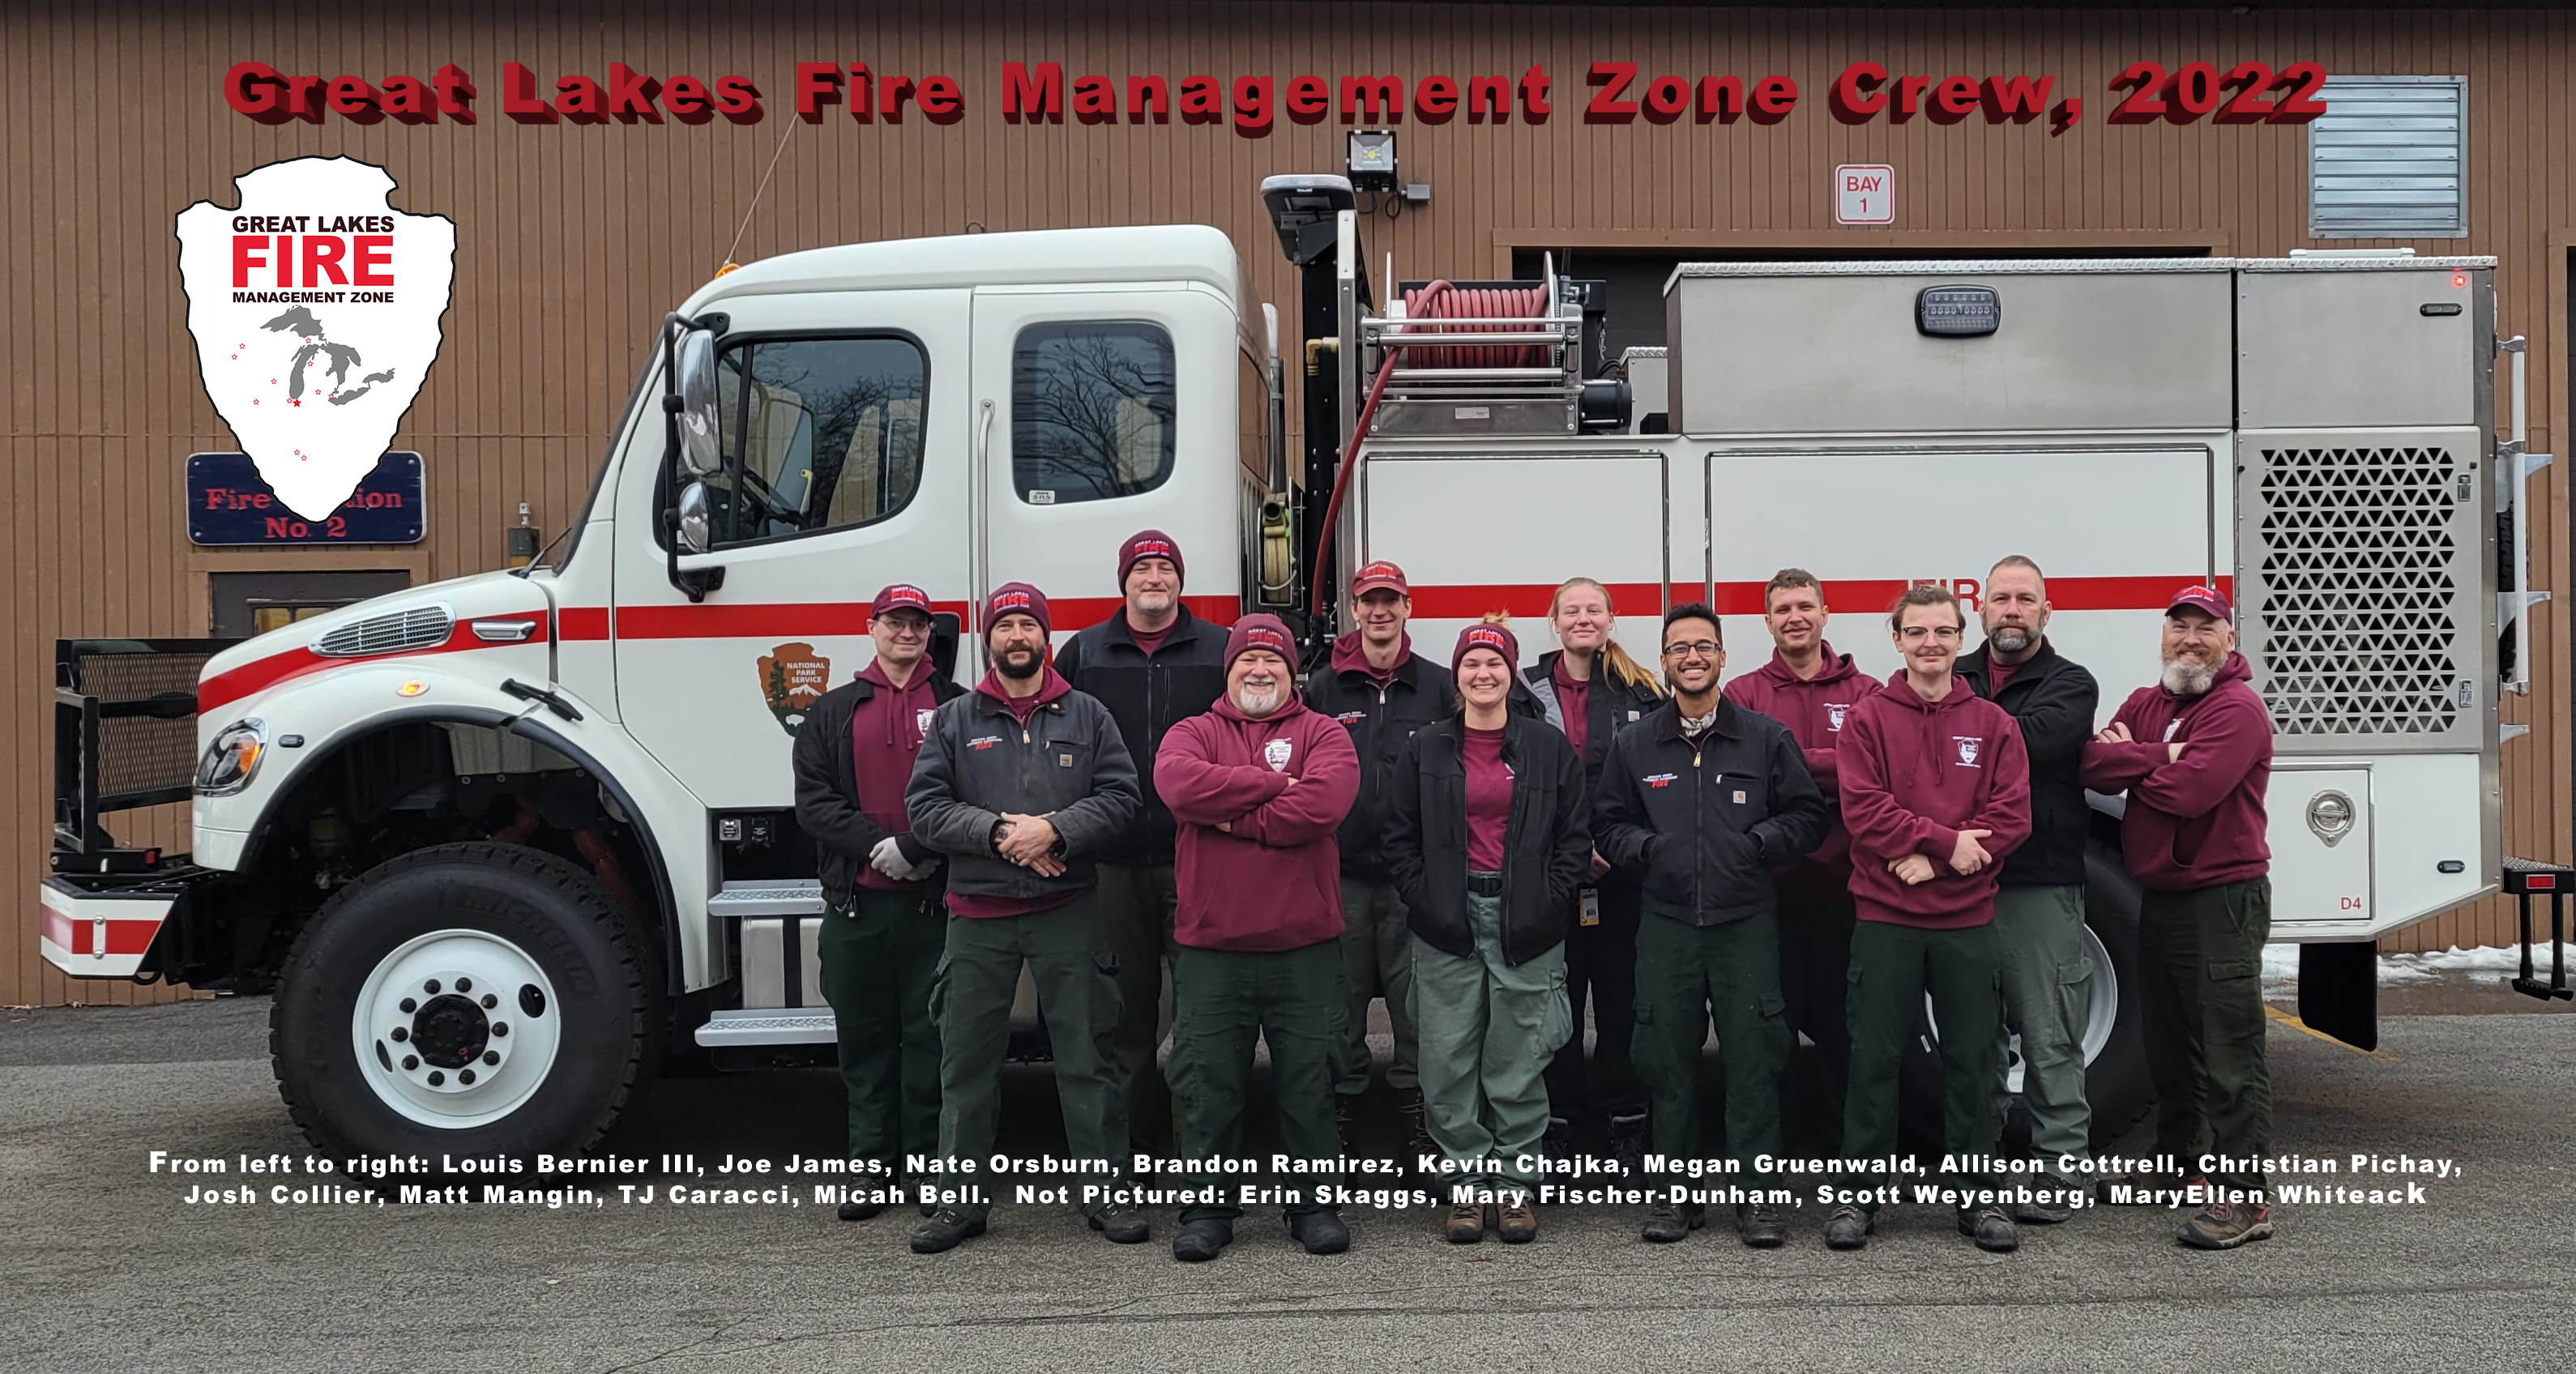 firefighters in maroon shirts and green pants pose for a group photo in front of a white NPS fire engine